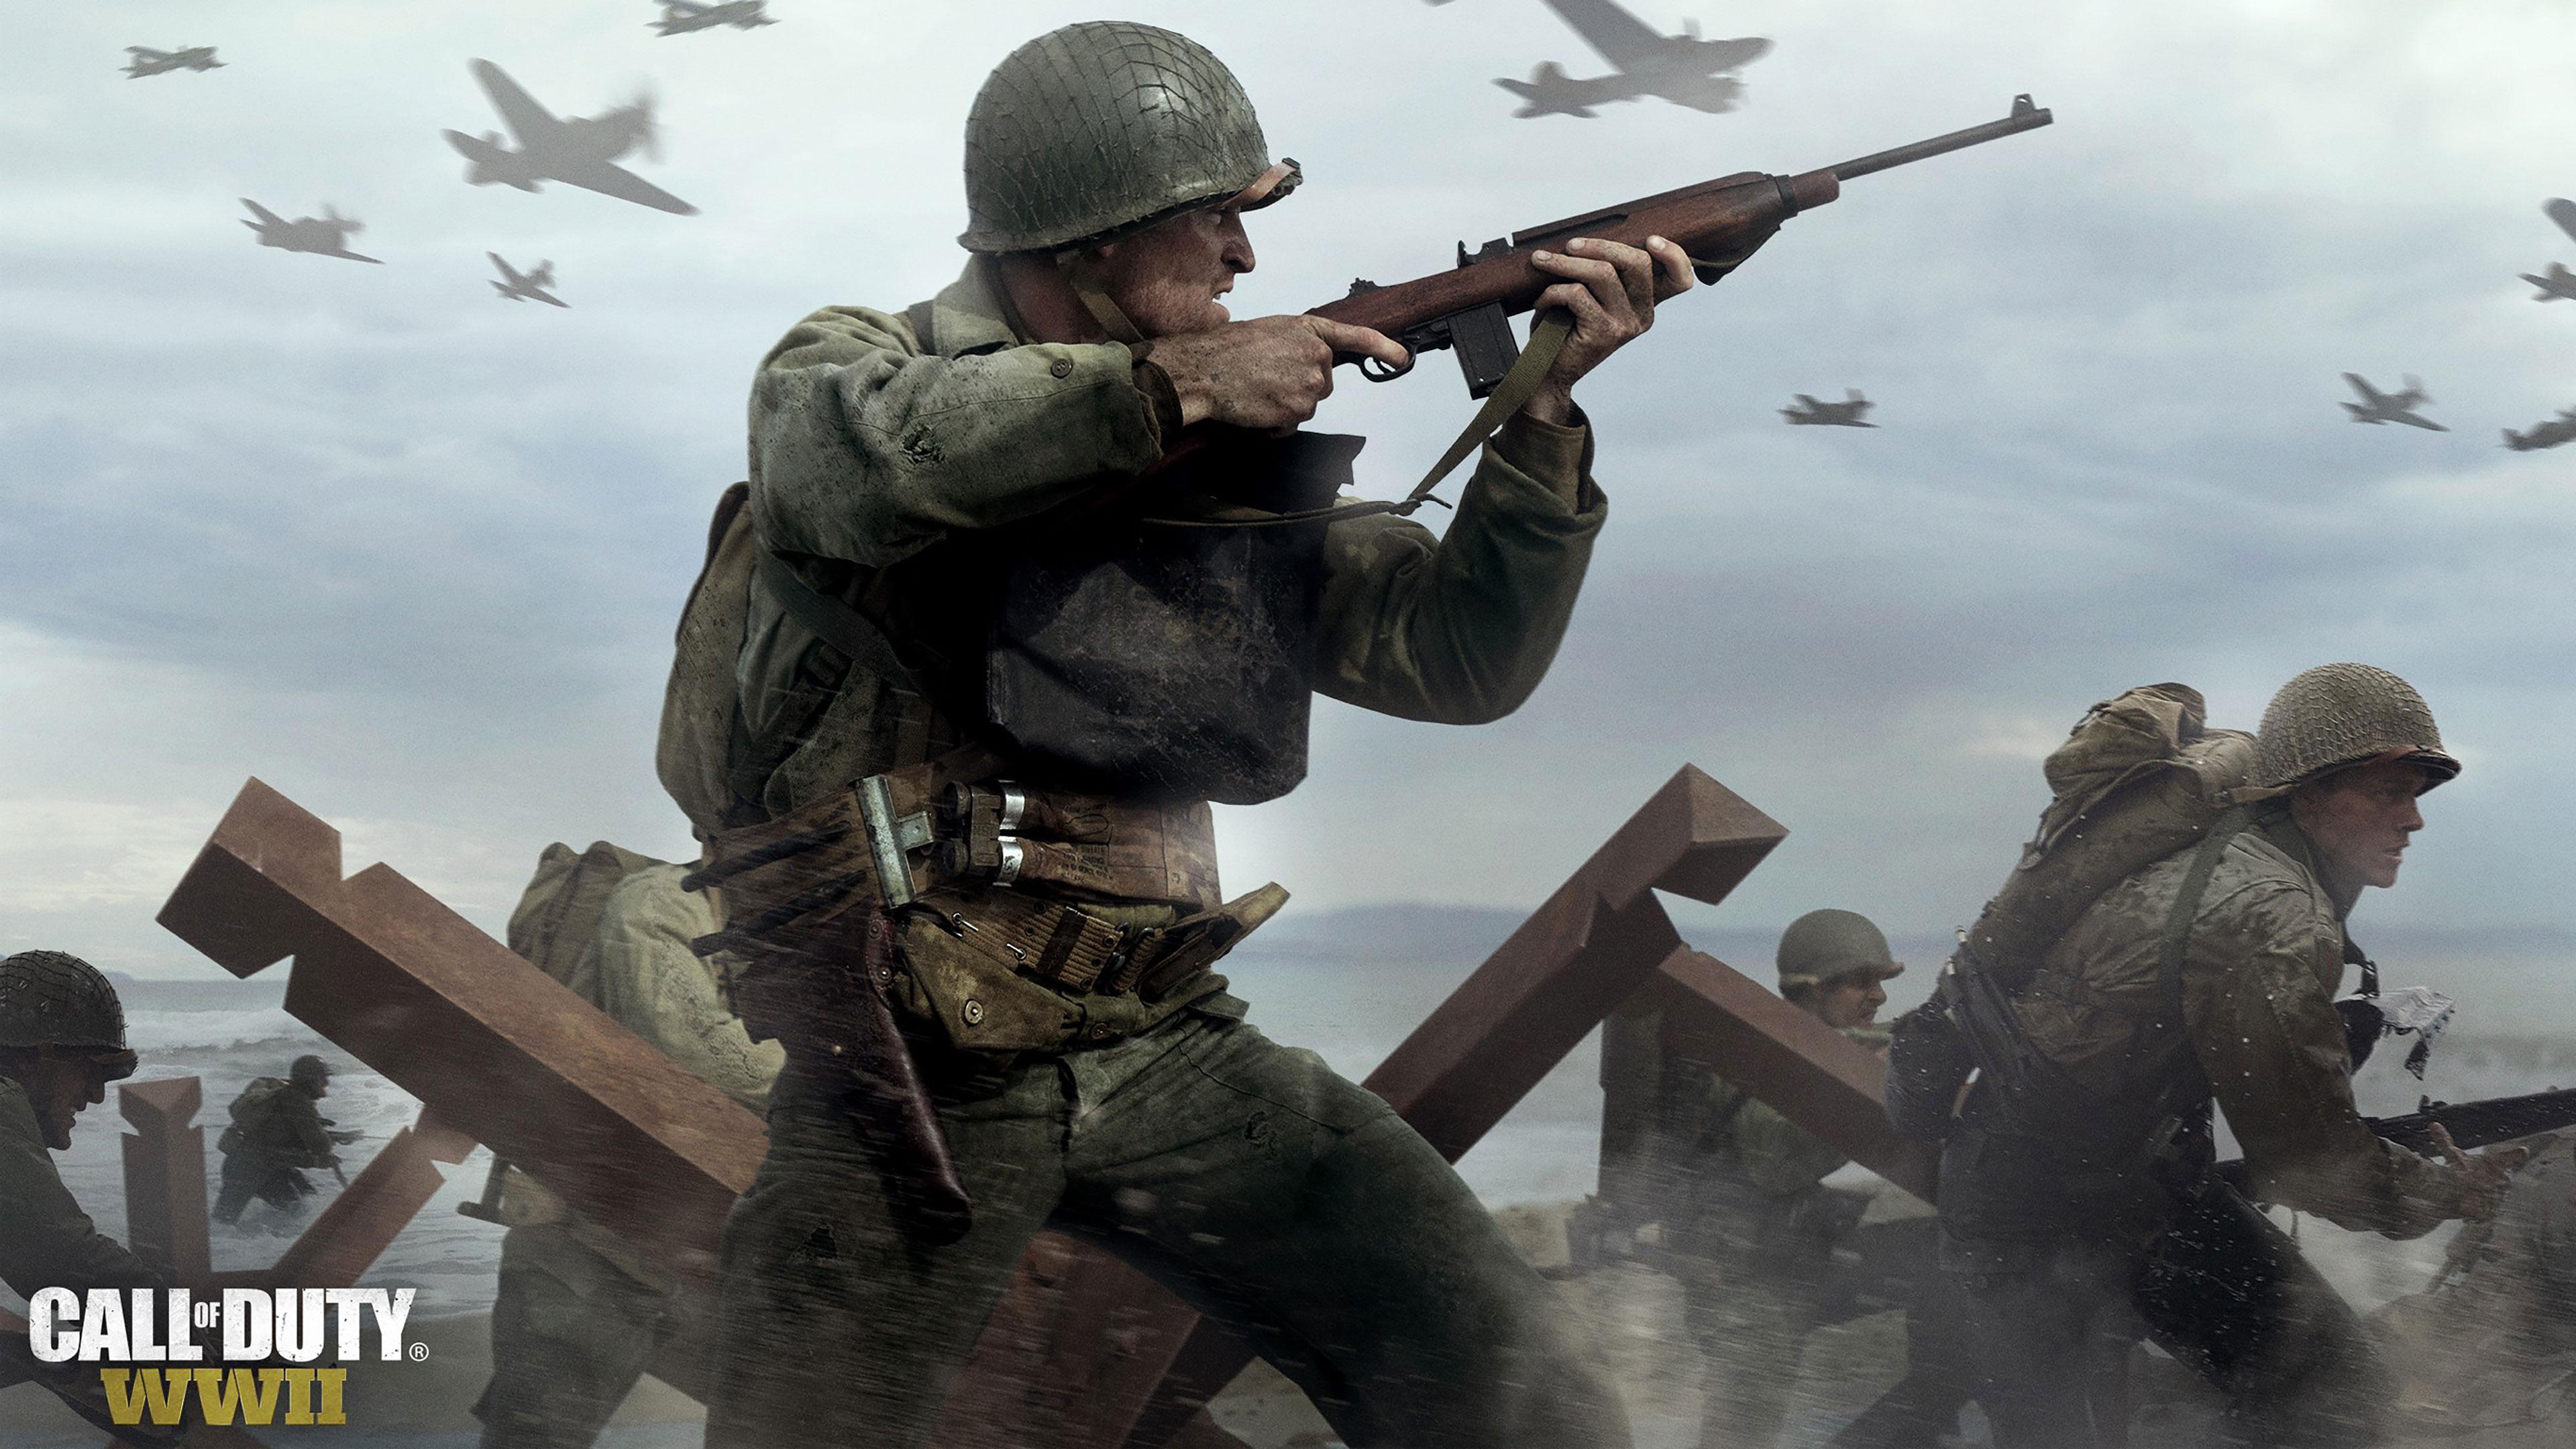 CALL OF DUTY WWII 4K Wallpaper 2 The Pics